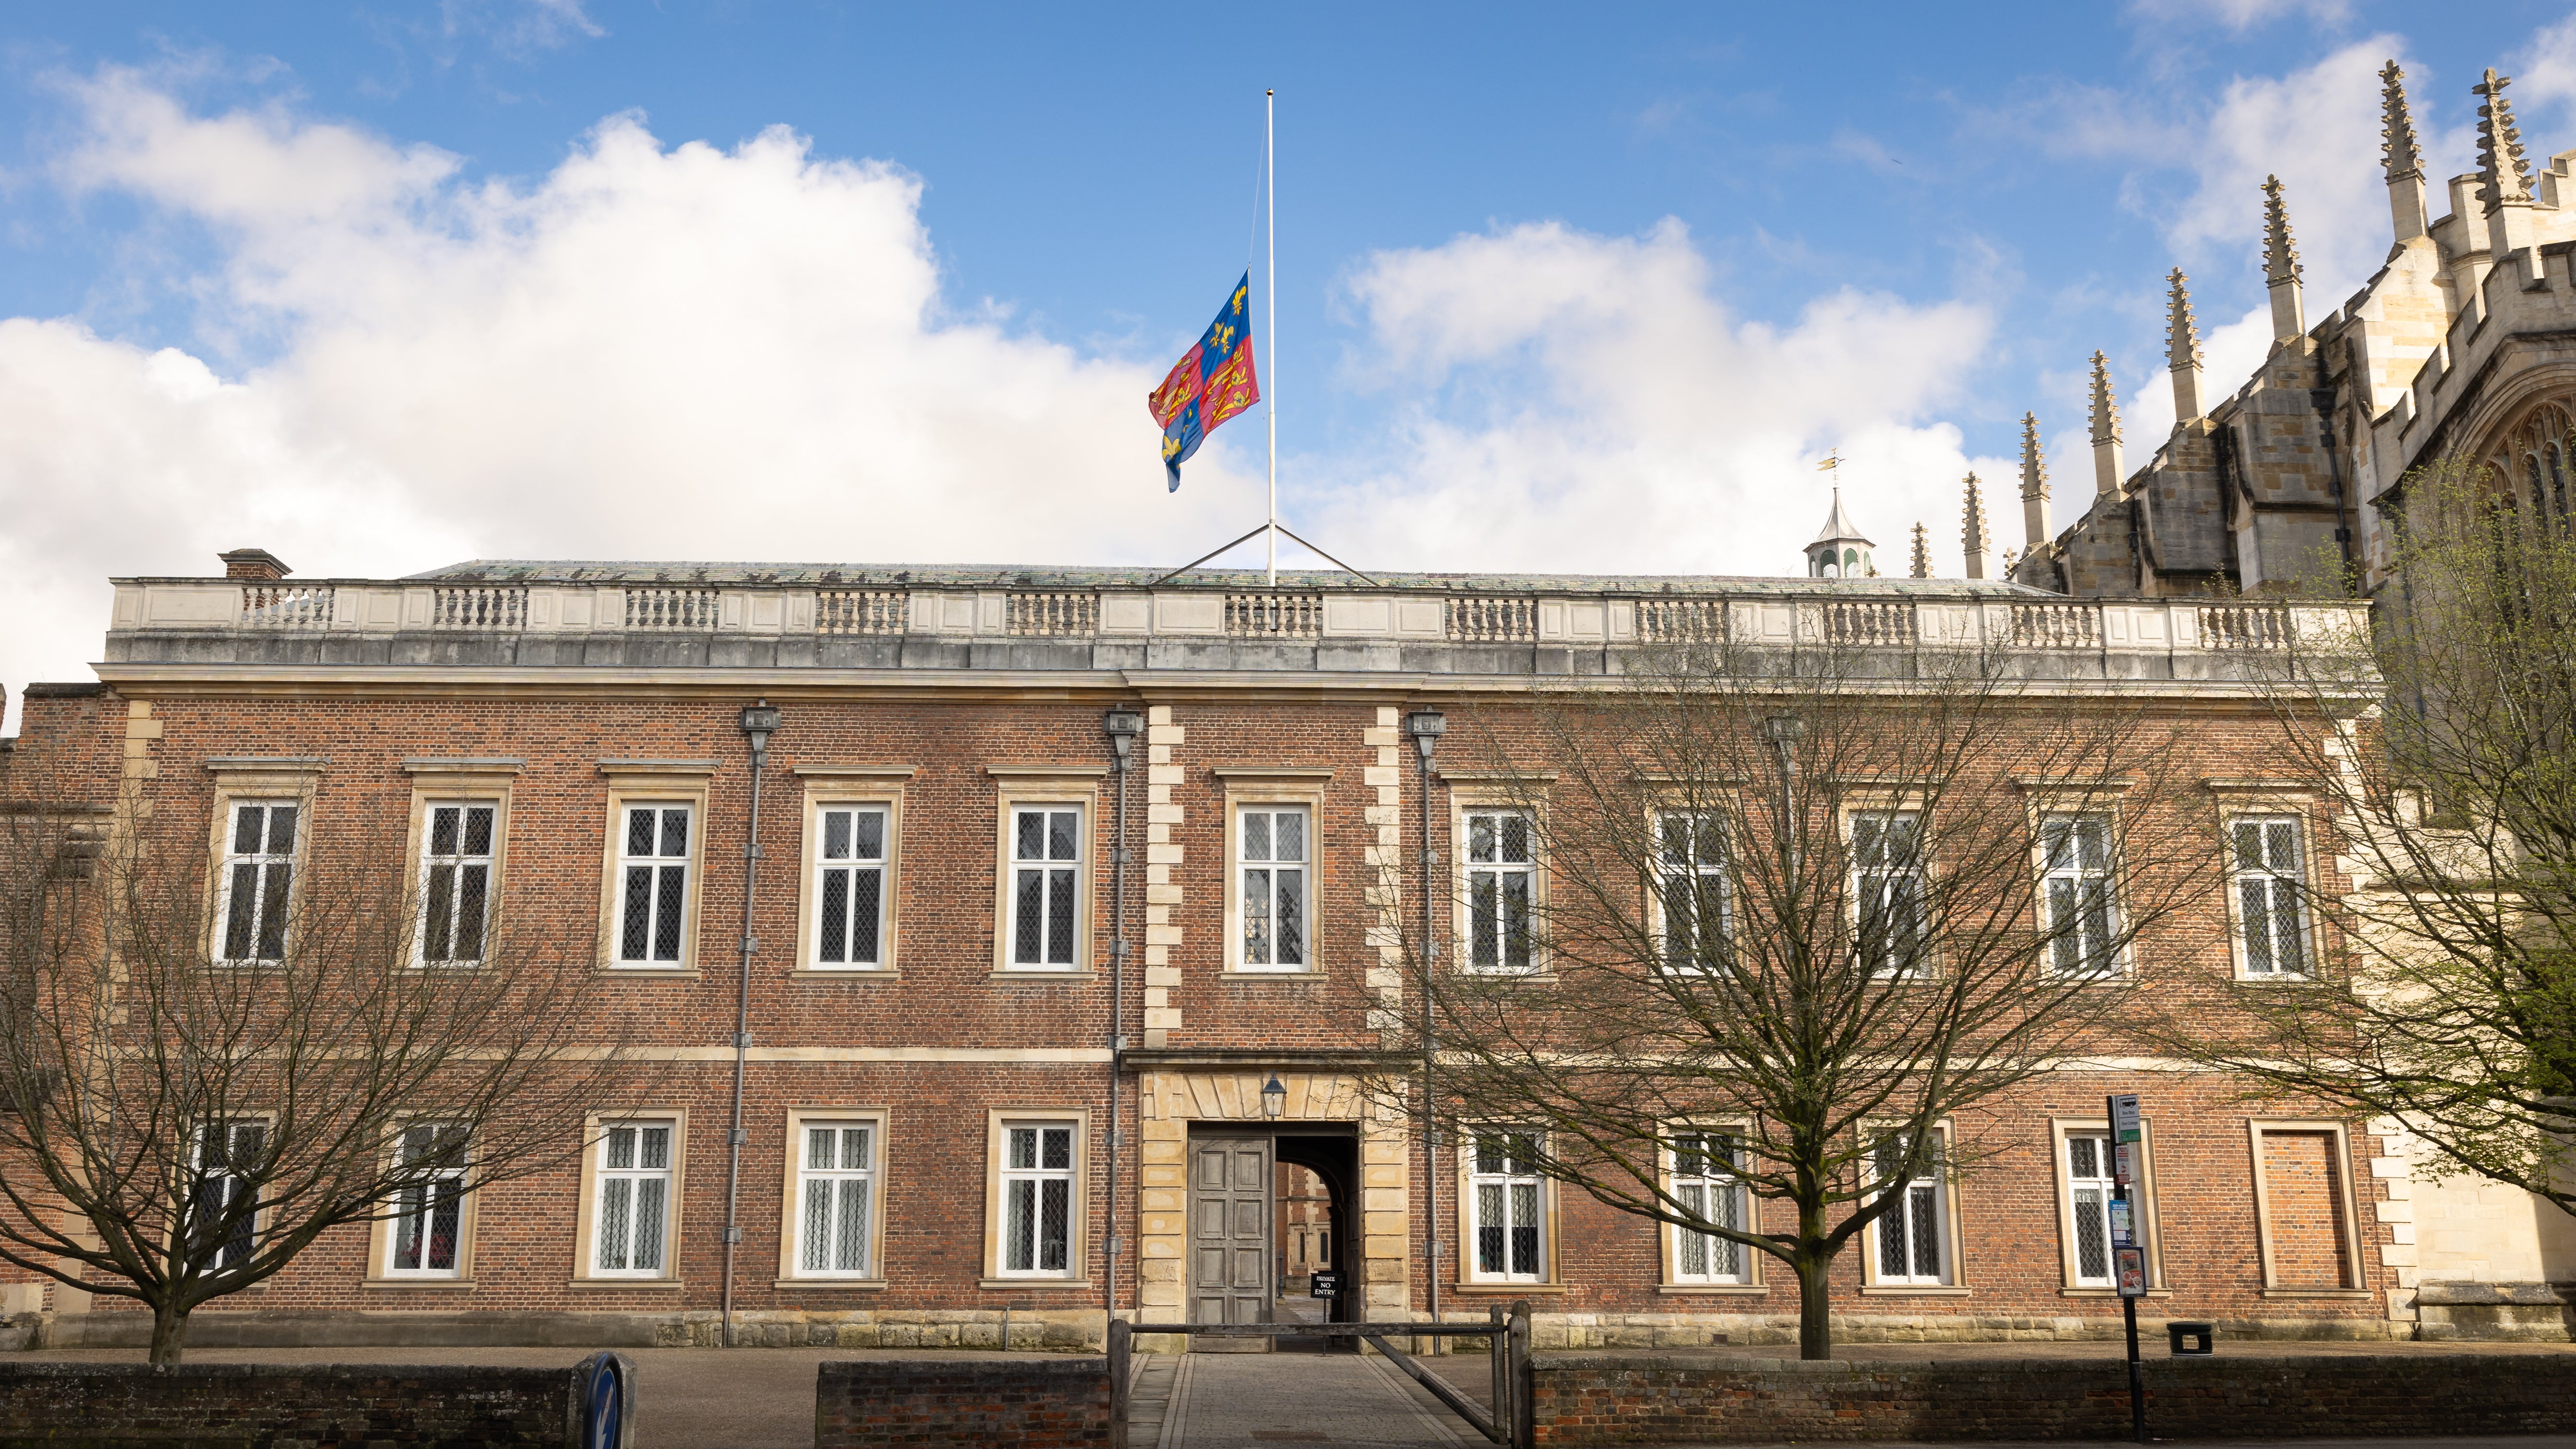 The Eton College flag was lowered to half-mast on Sunday following Raphaël’s death